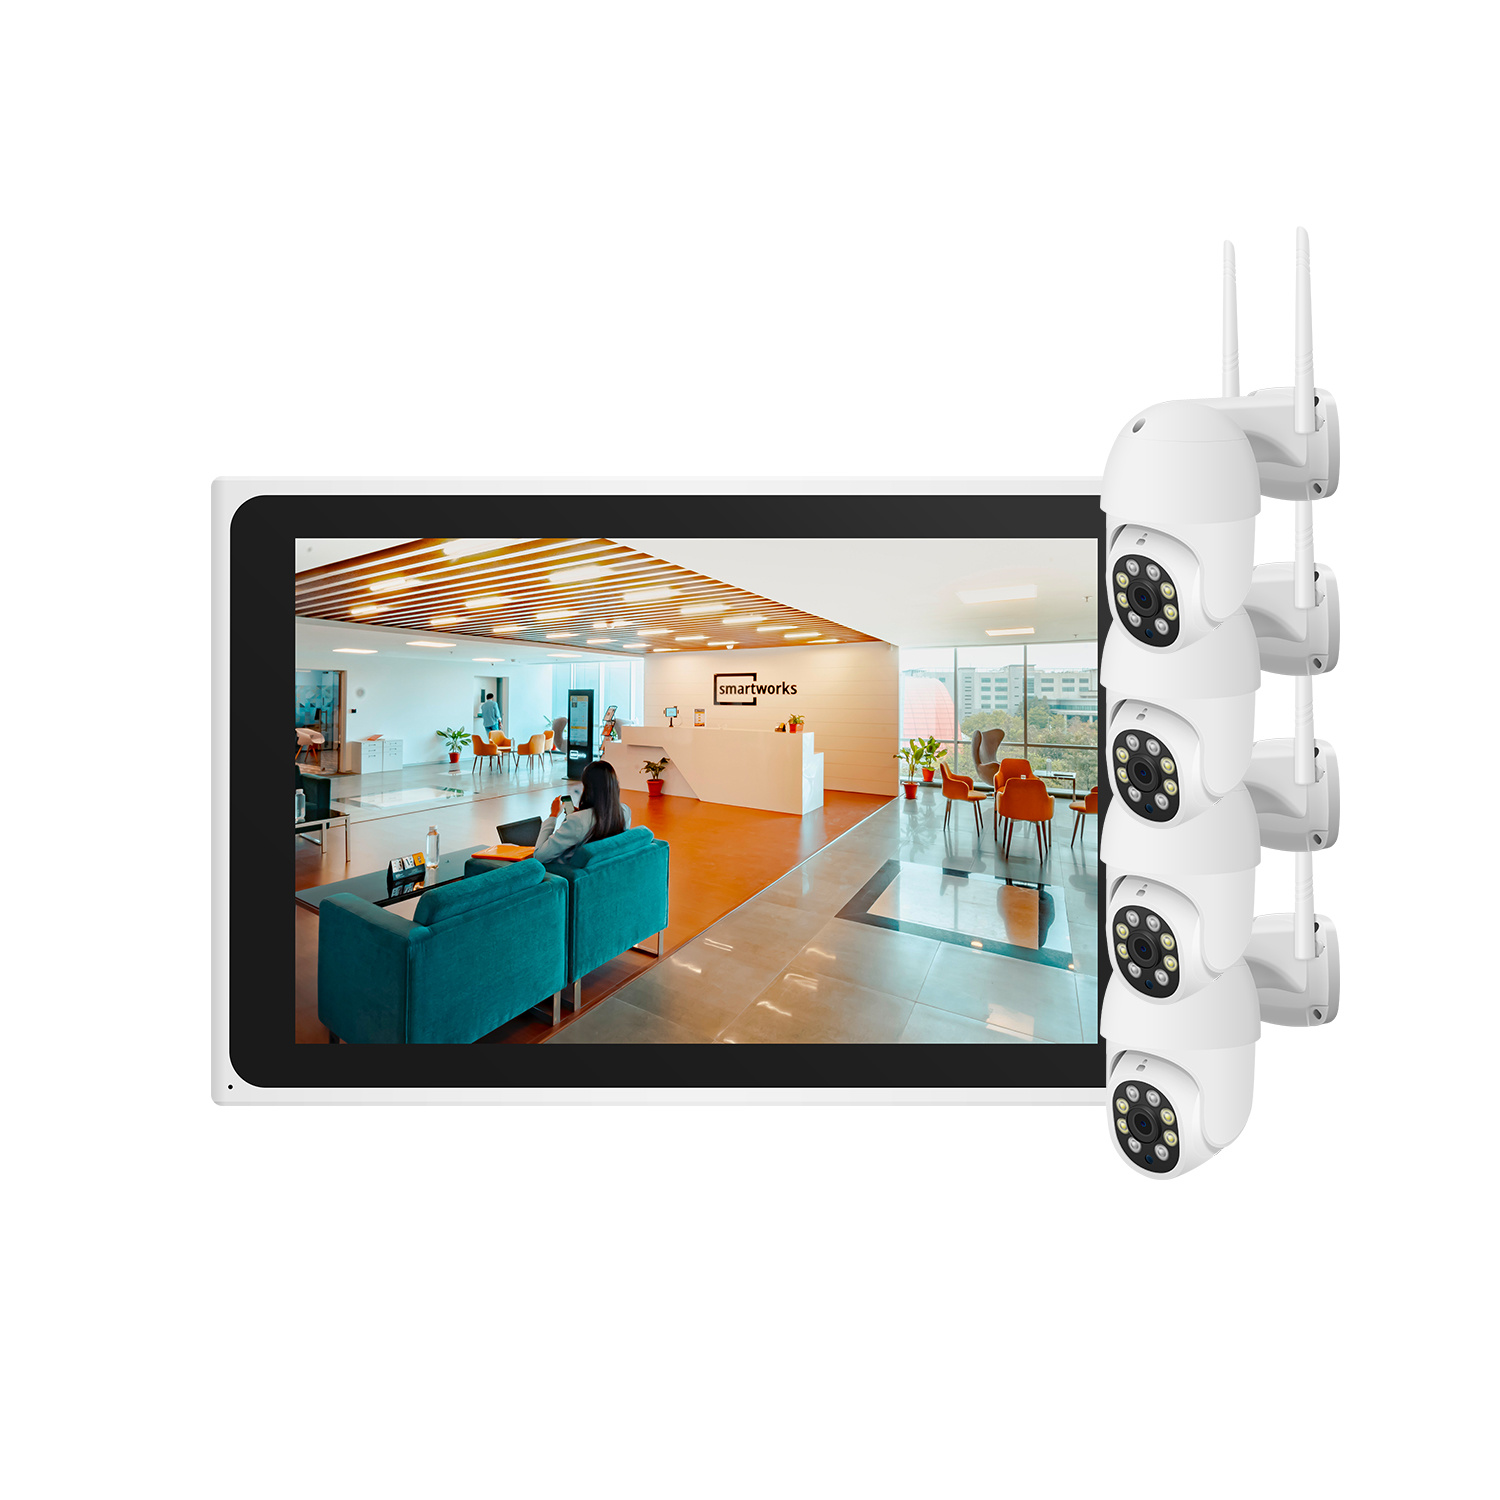 3MP HD Wireless NVR Security System Kit